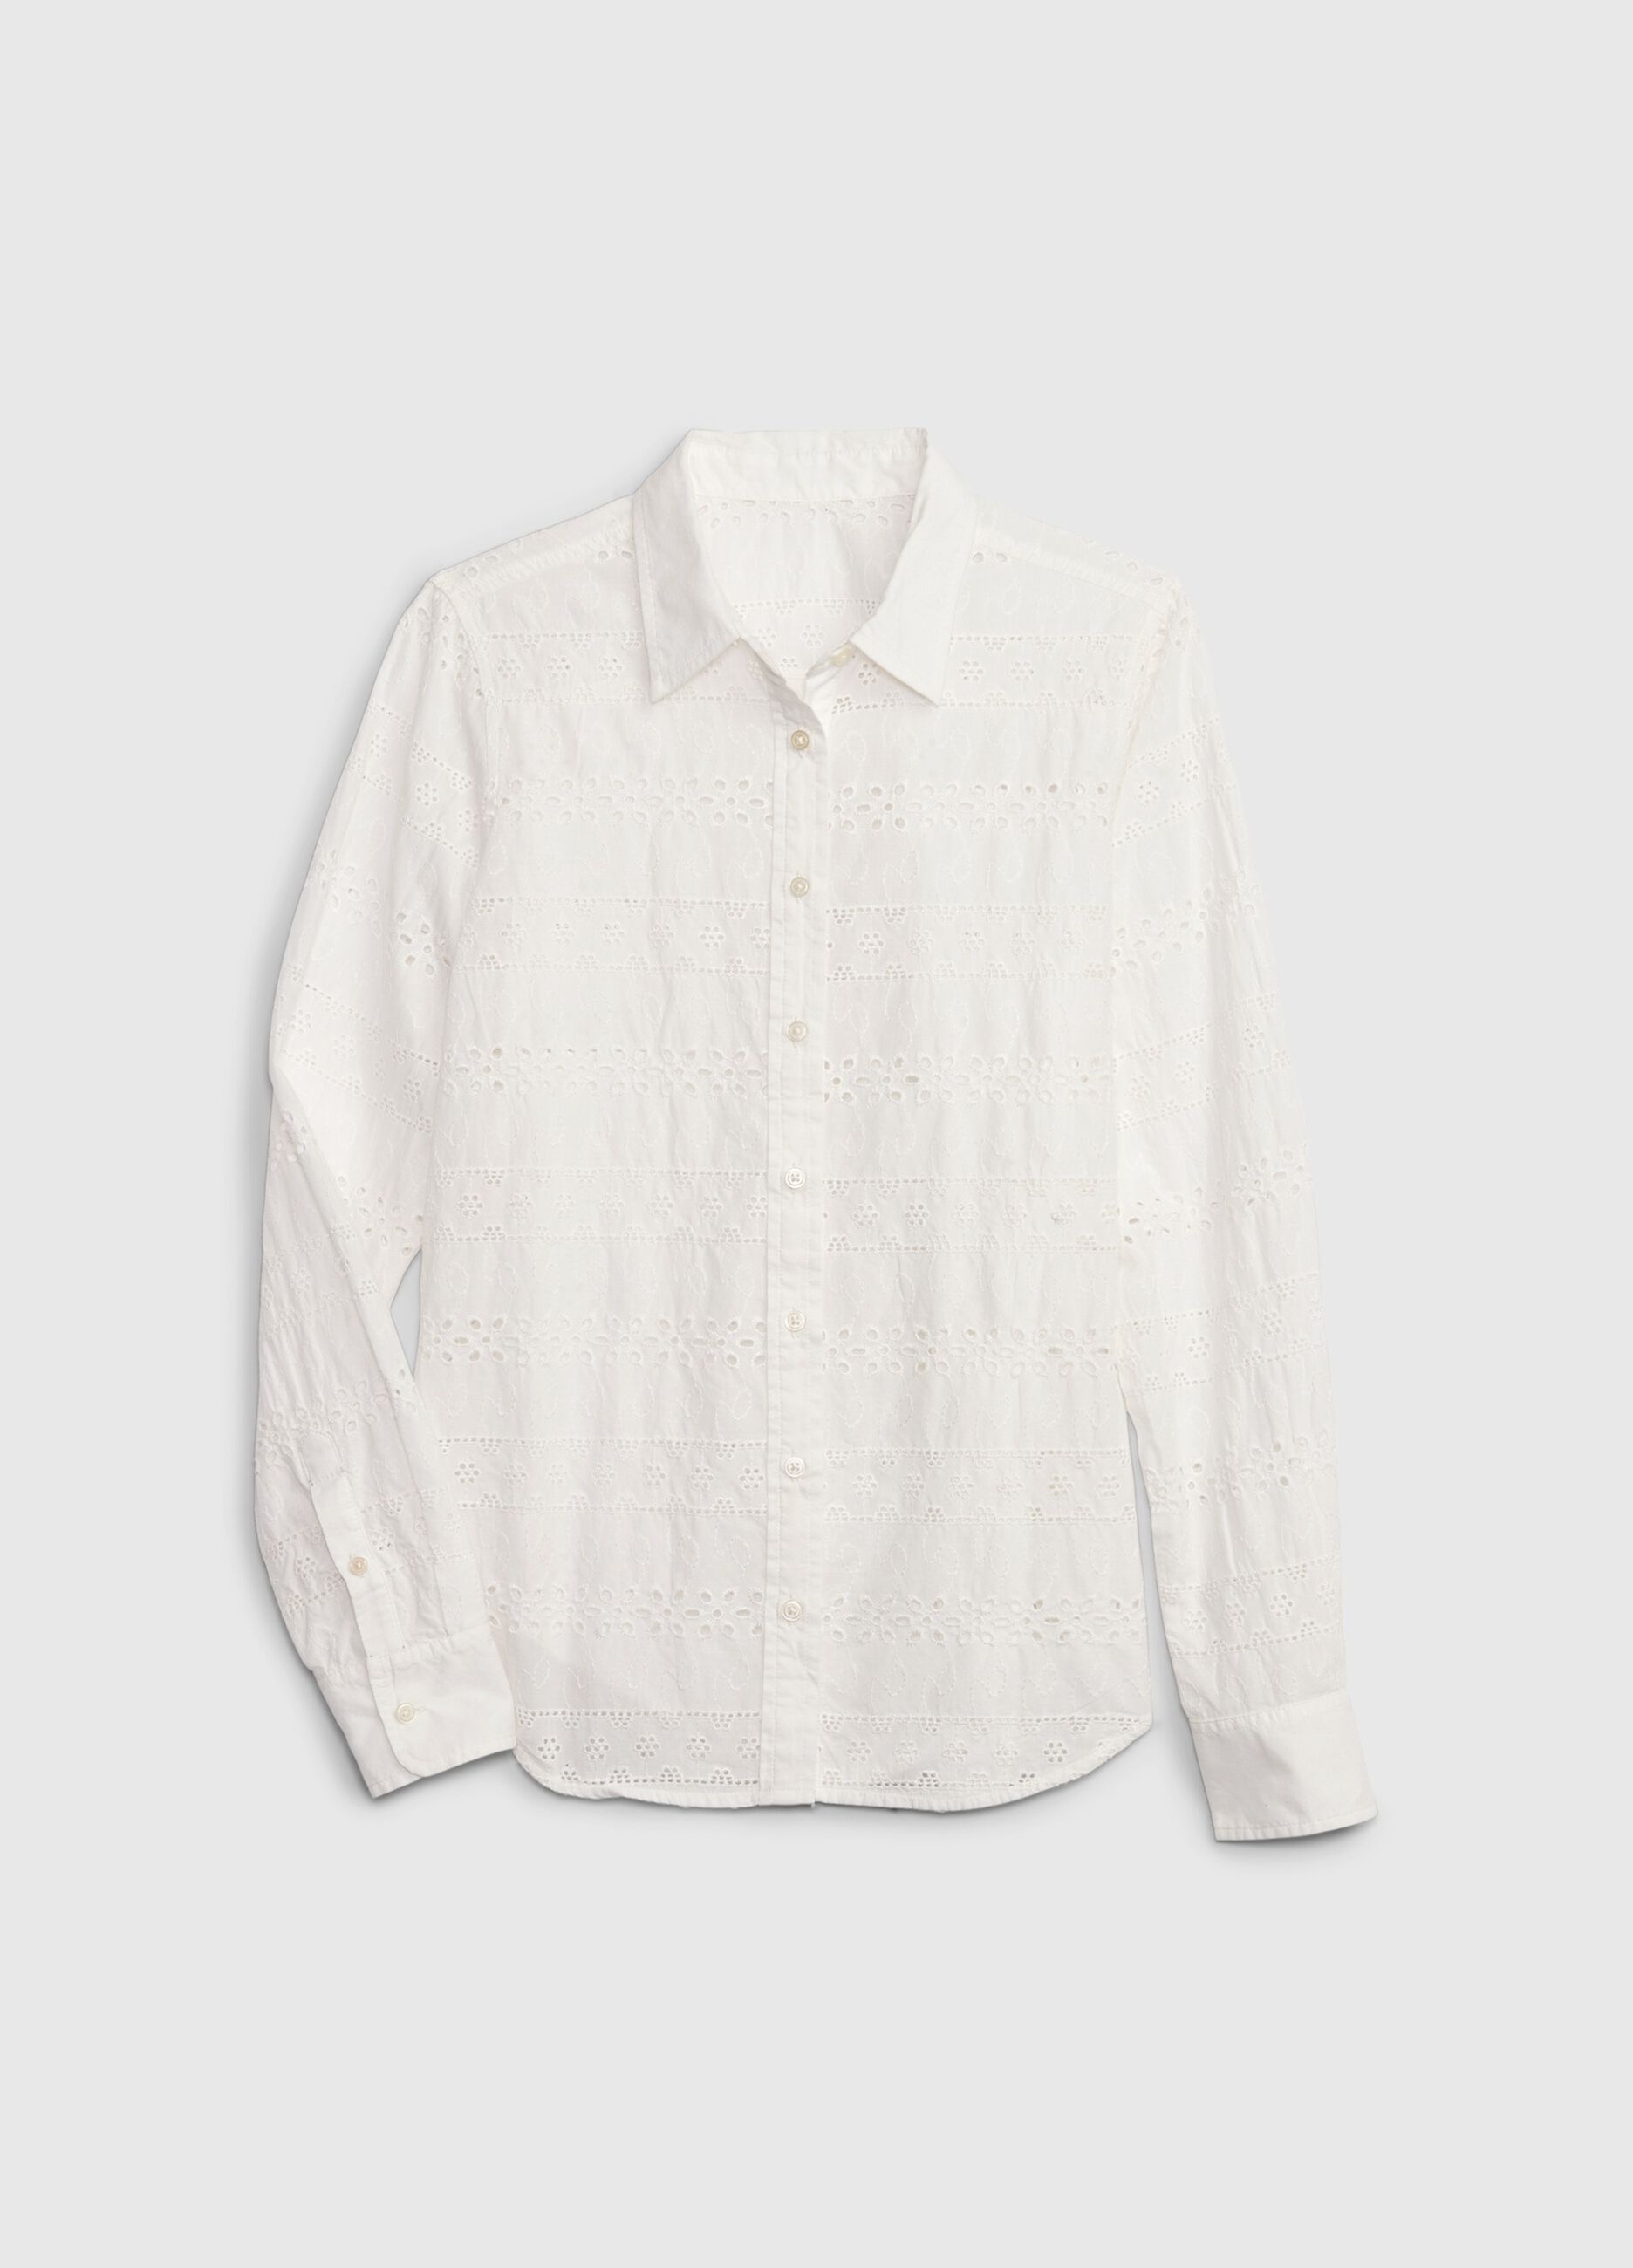 Broderie anglaise lace shirt